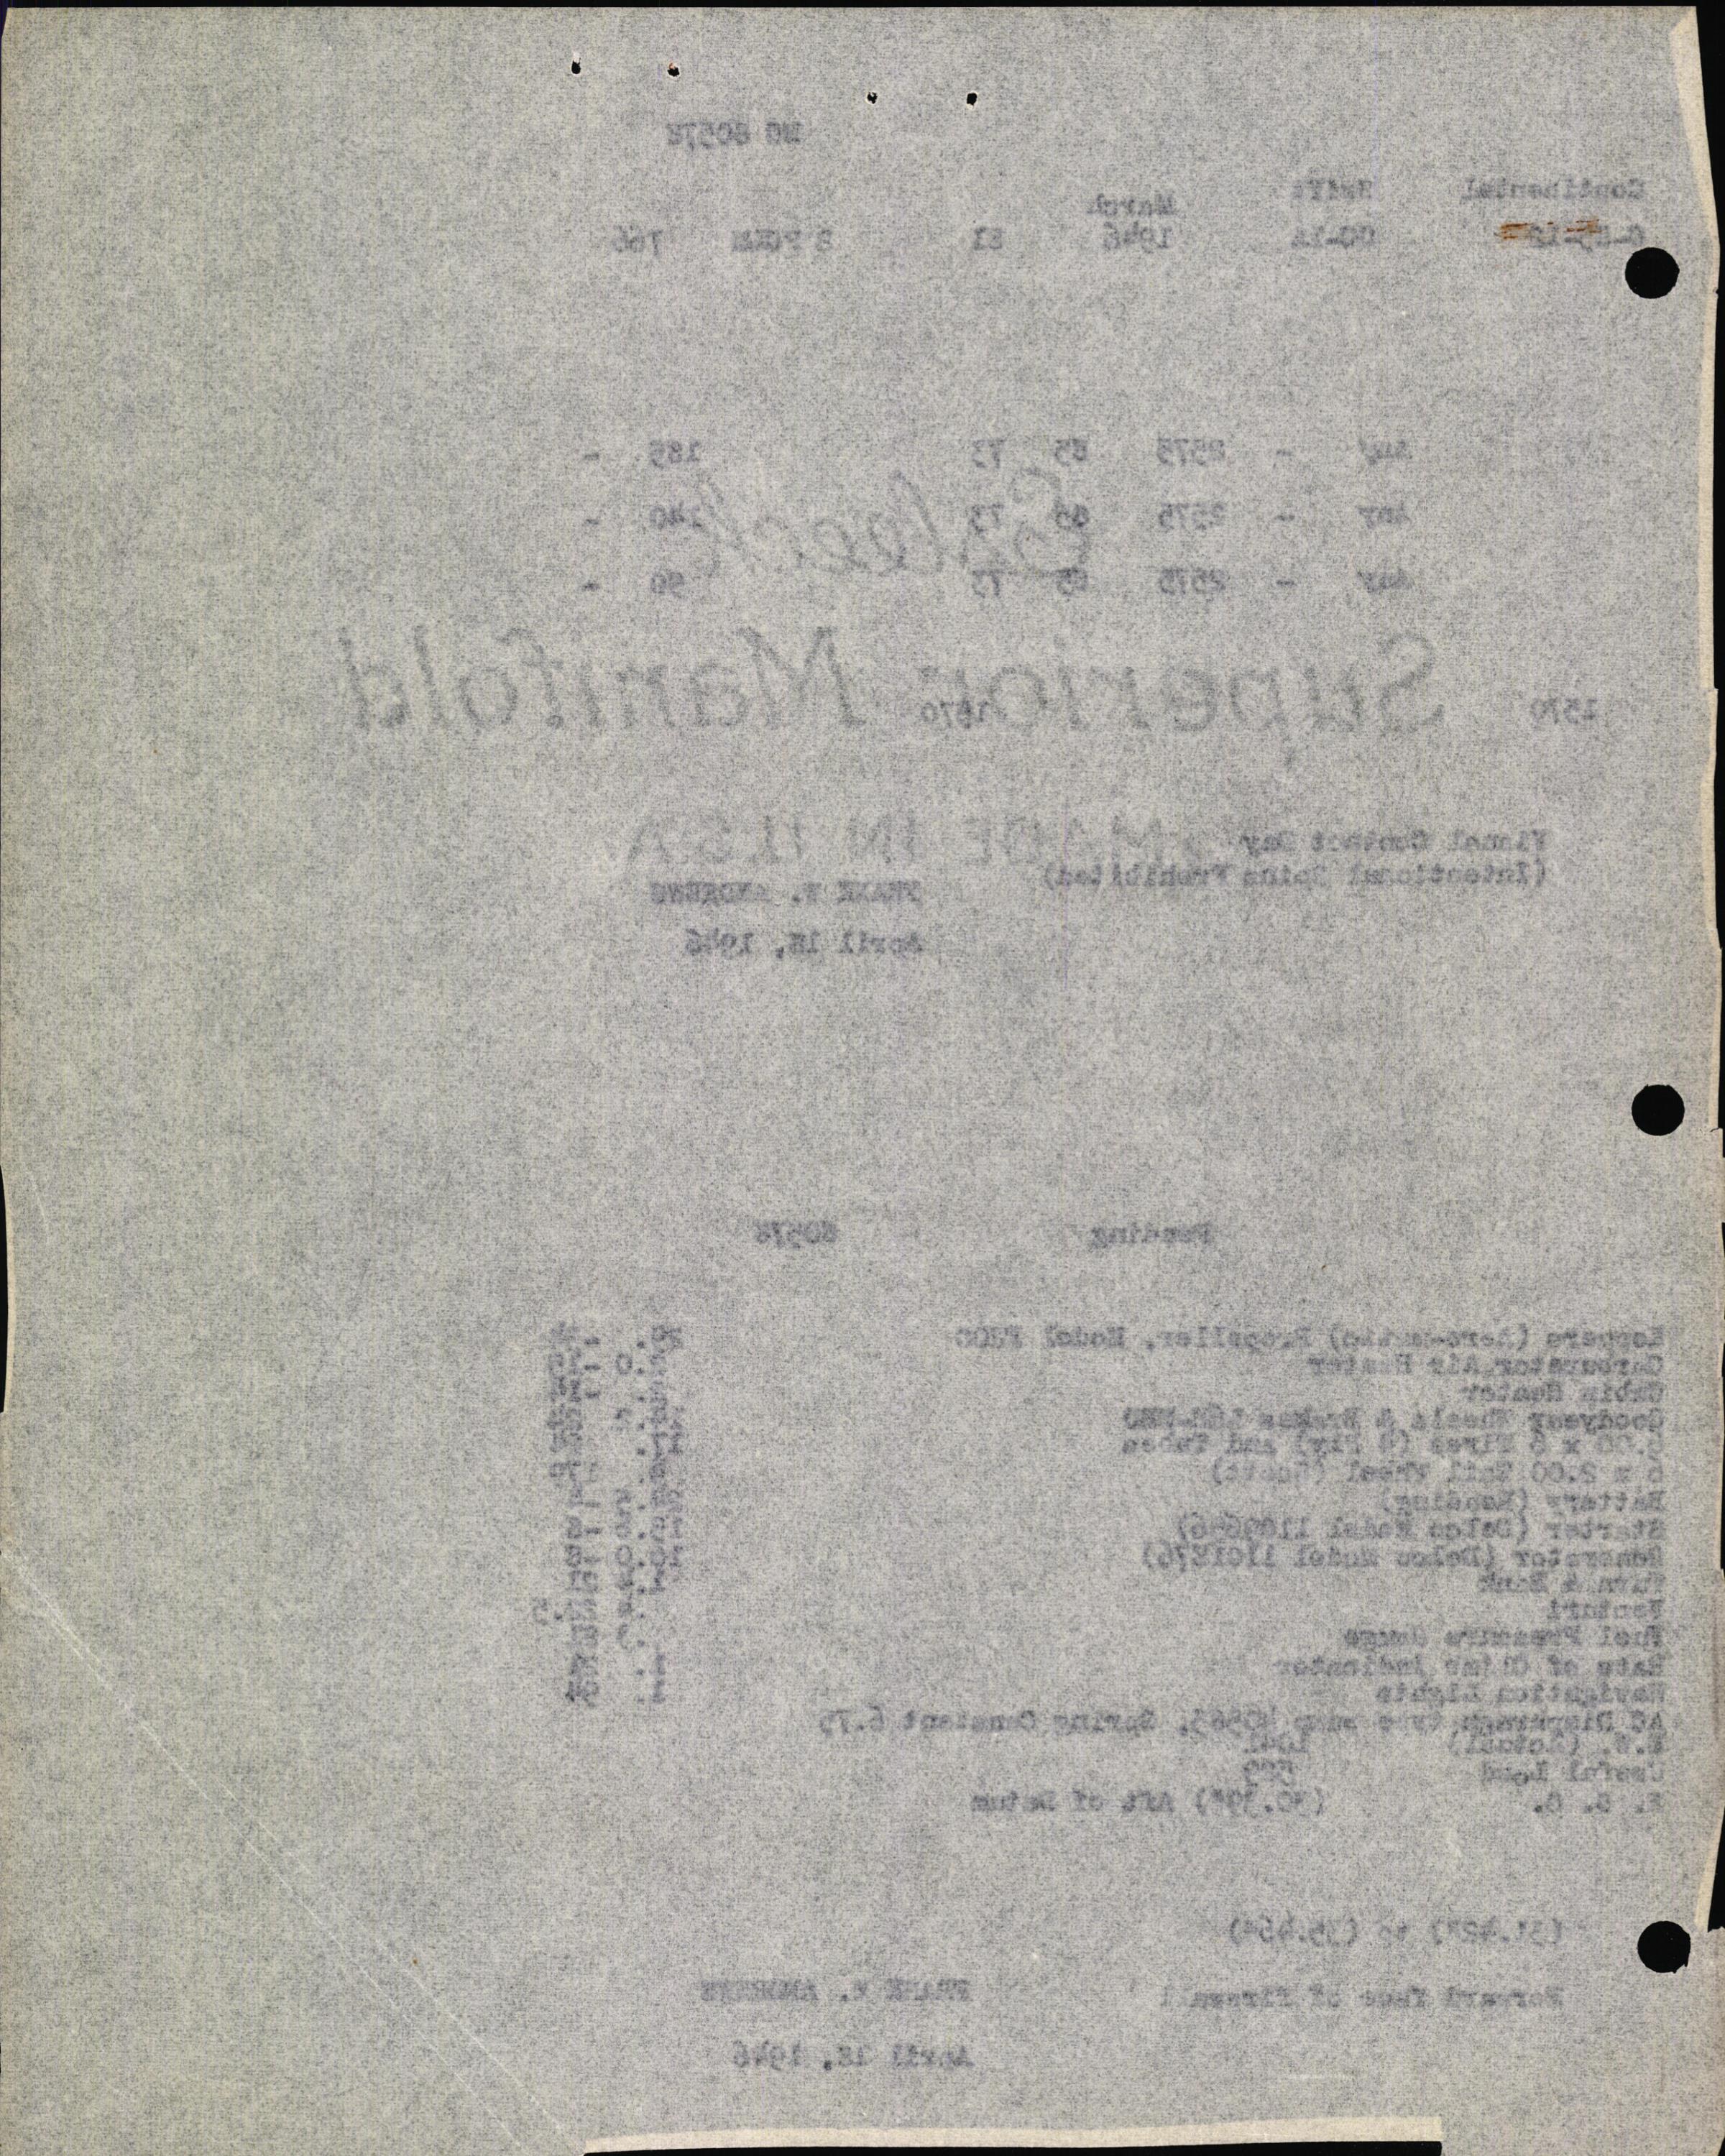 Sample page 4 from AirCorps Library document: Technical Information for Serial Number 81